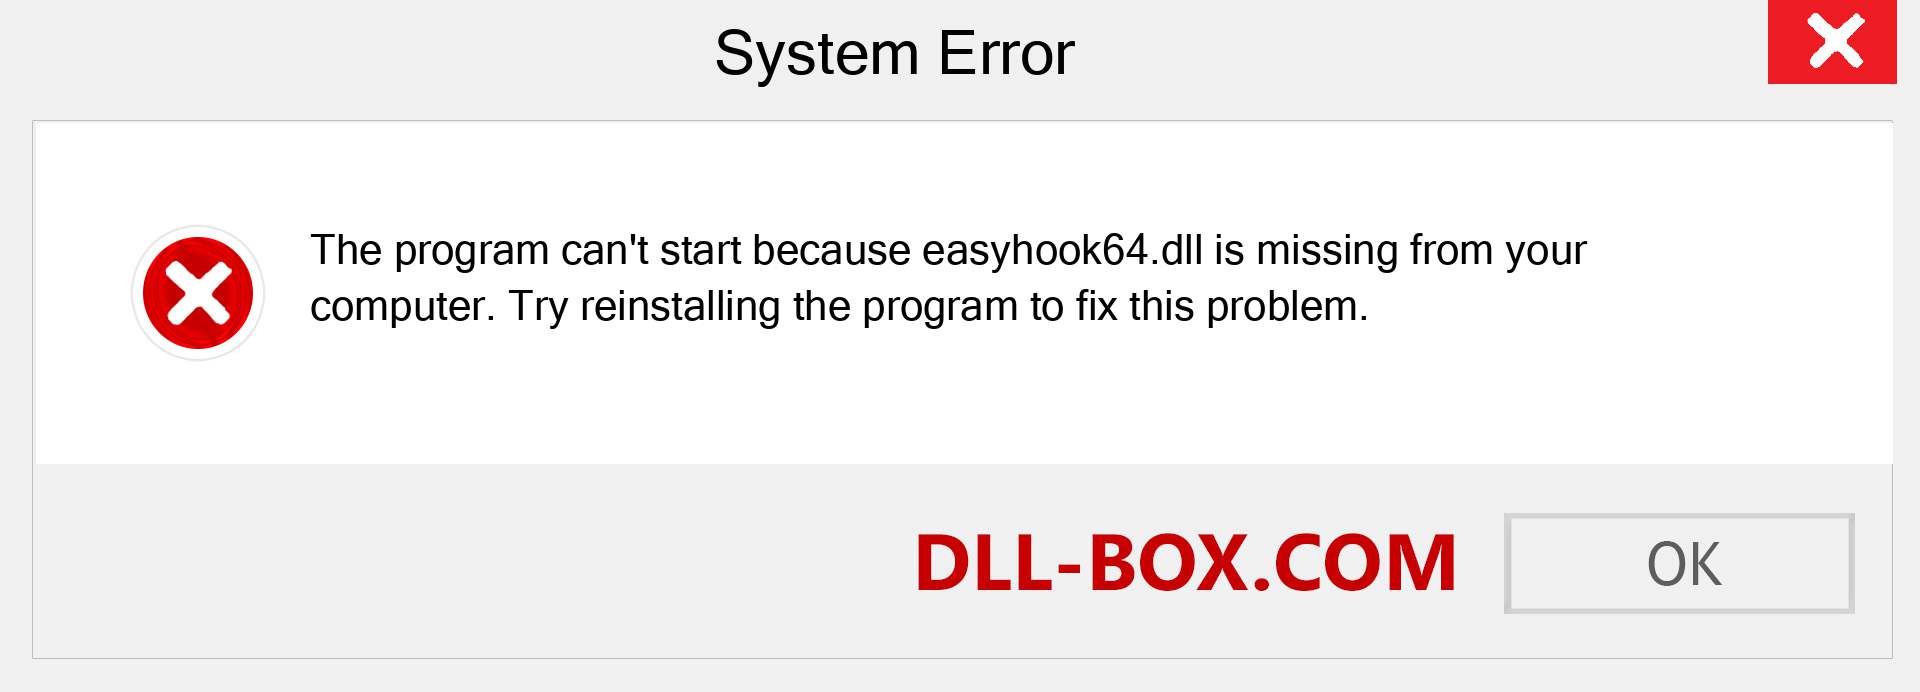  easyhook64.dll file is missing?. Download for Windows 7, 8, 10 - Fix  easyhook64 dll Missing Error on Windows, photos, images